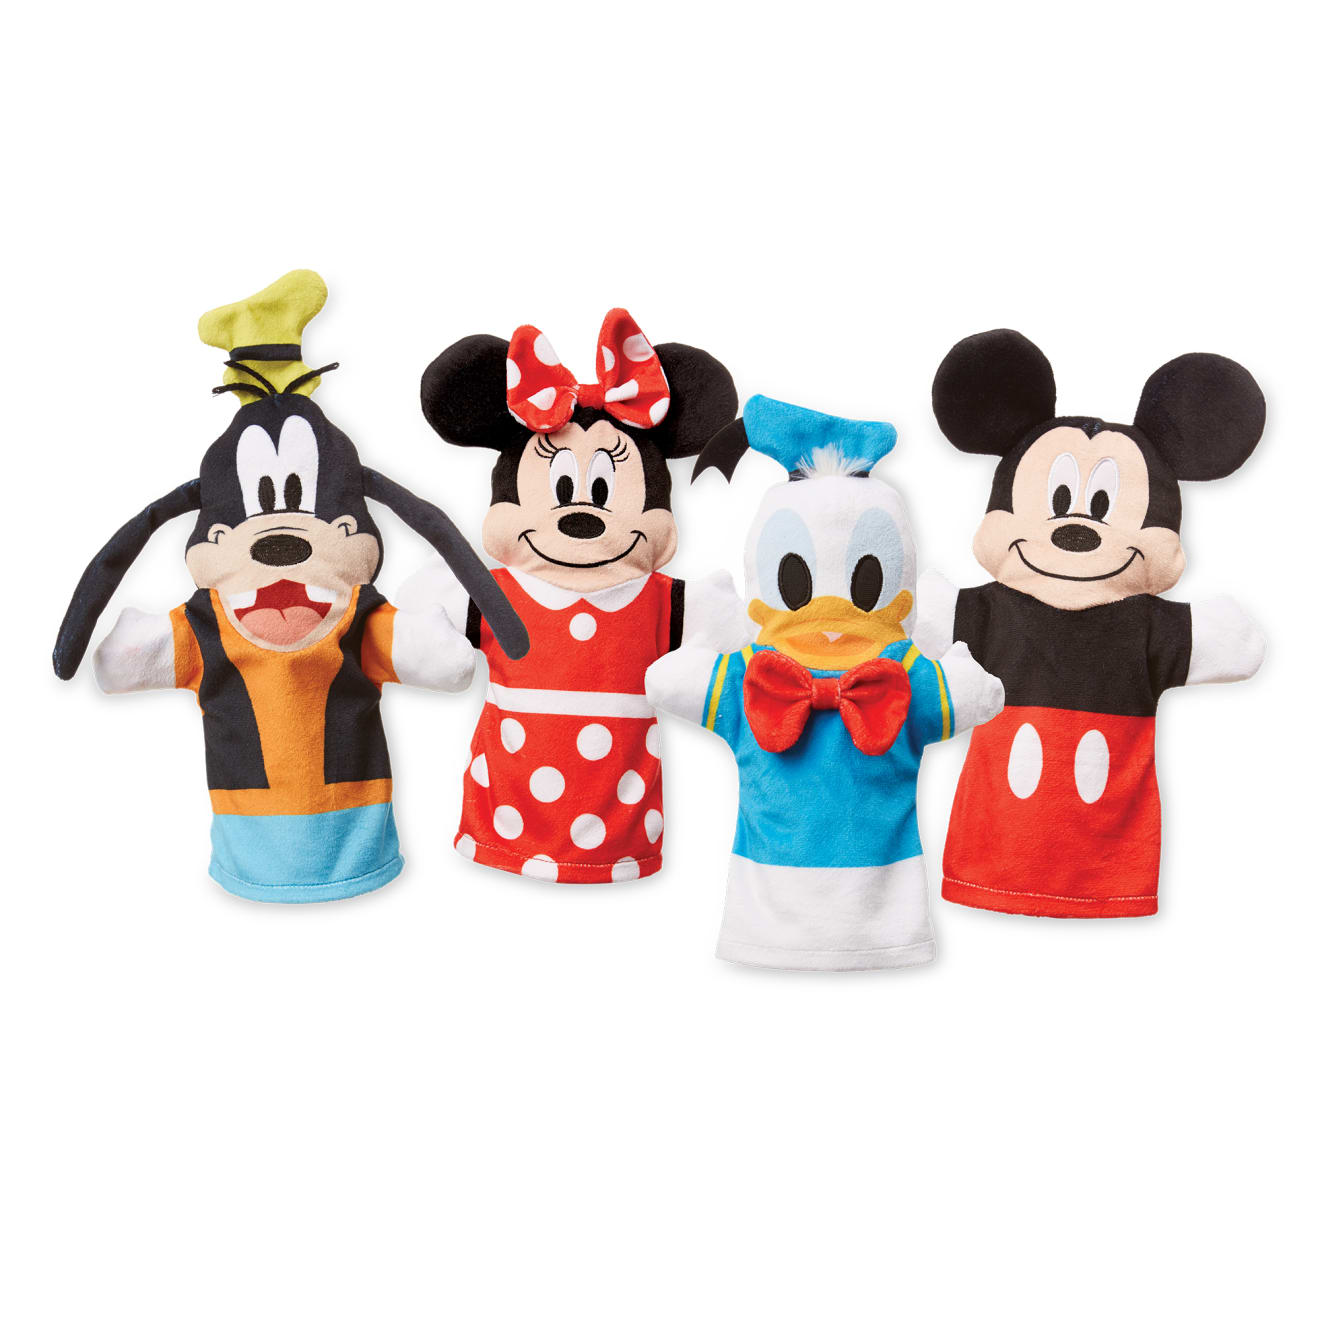 https://cdn.shopify.com/s/files/1/0550/8487/5830/products/Mickey-Mouse-Friends-Soft-Cuddly-Hand-Puppets-007551-1-Pieces-Out.jpg?v=1664895043